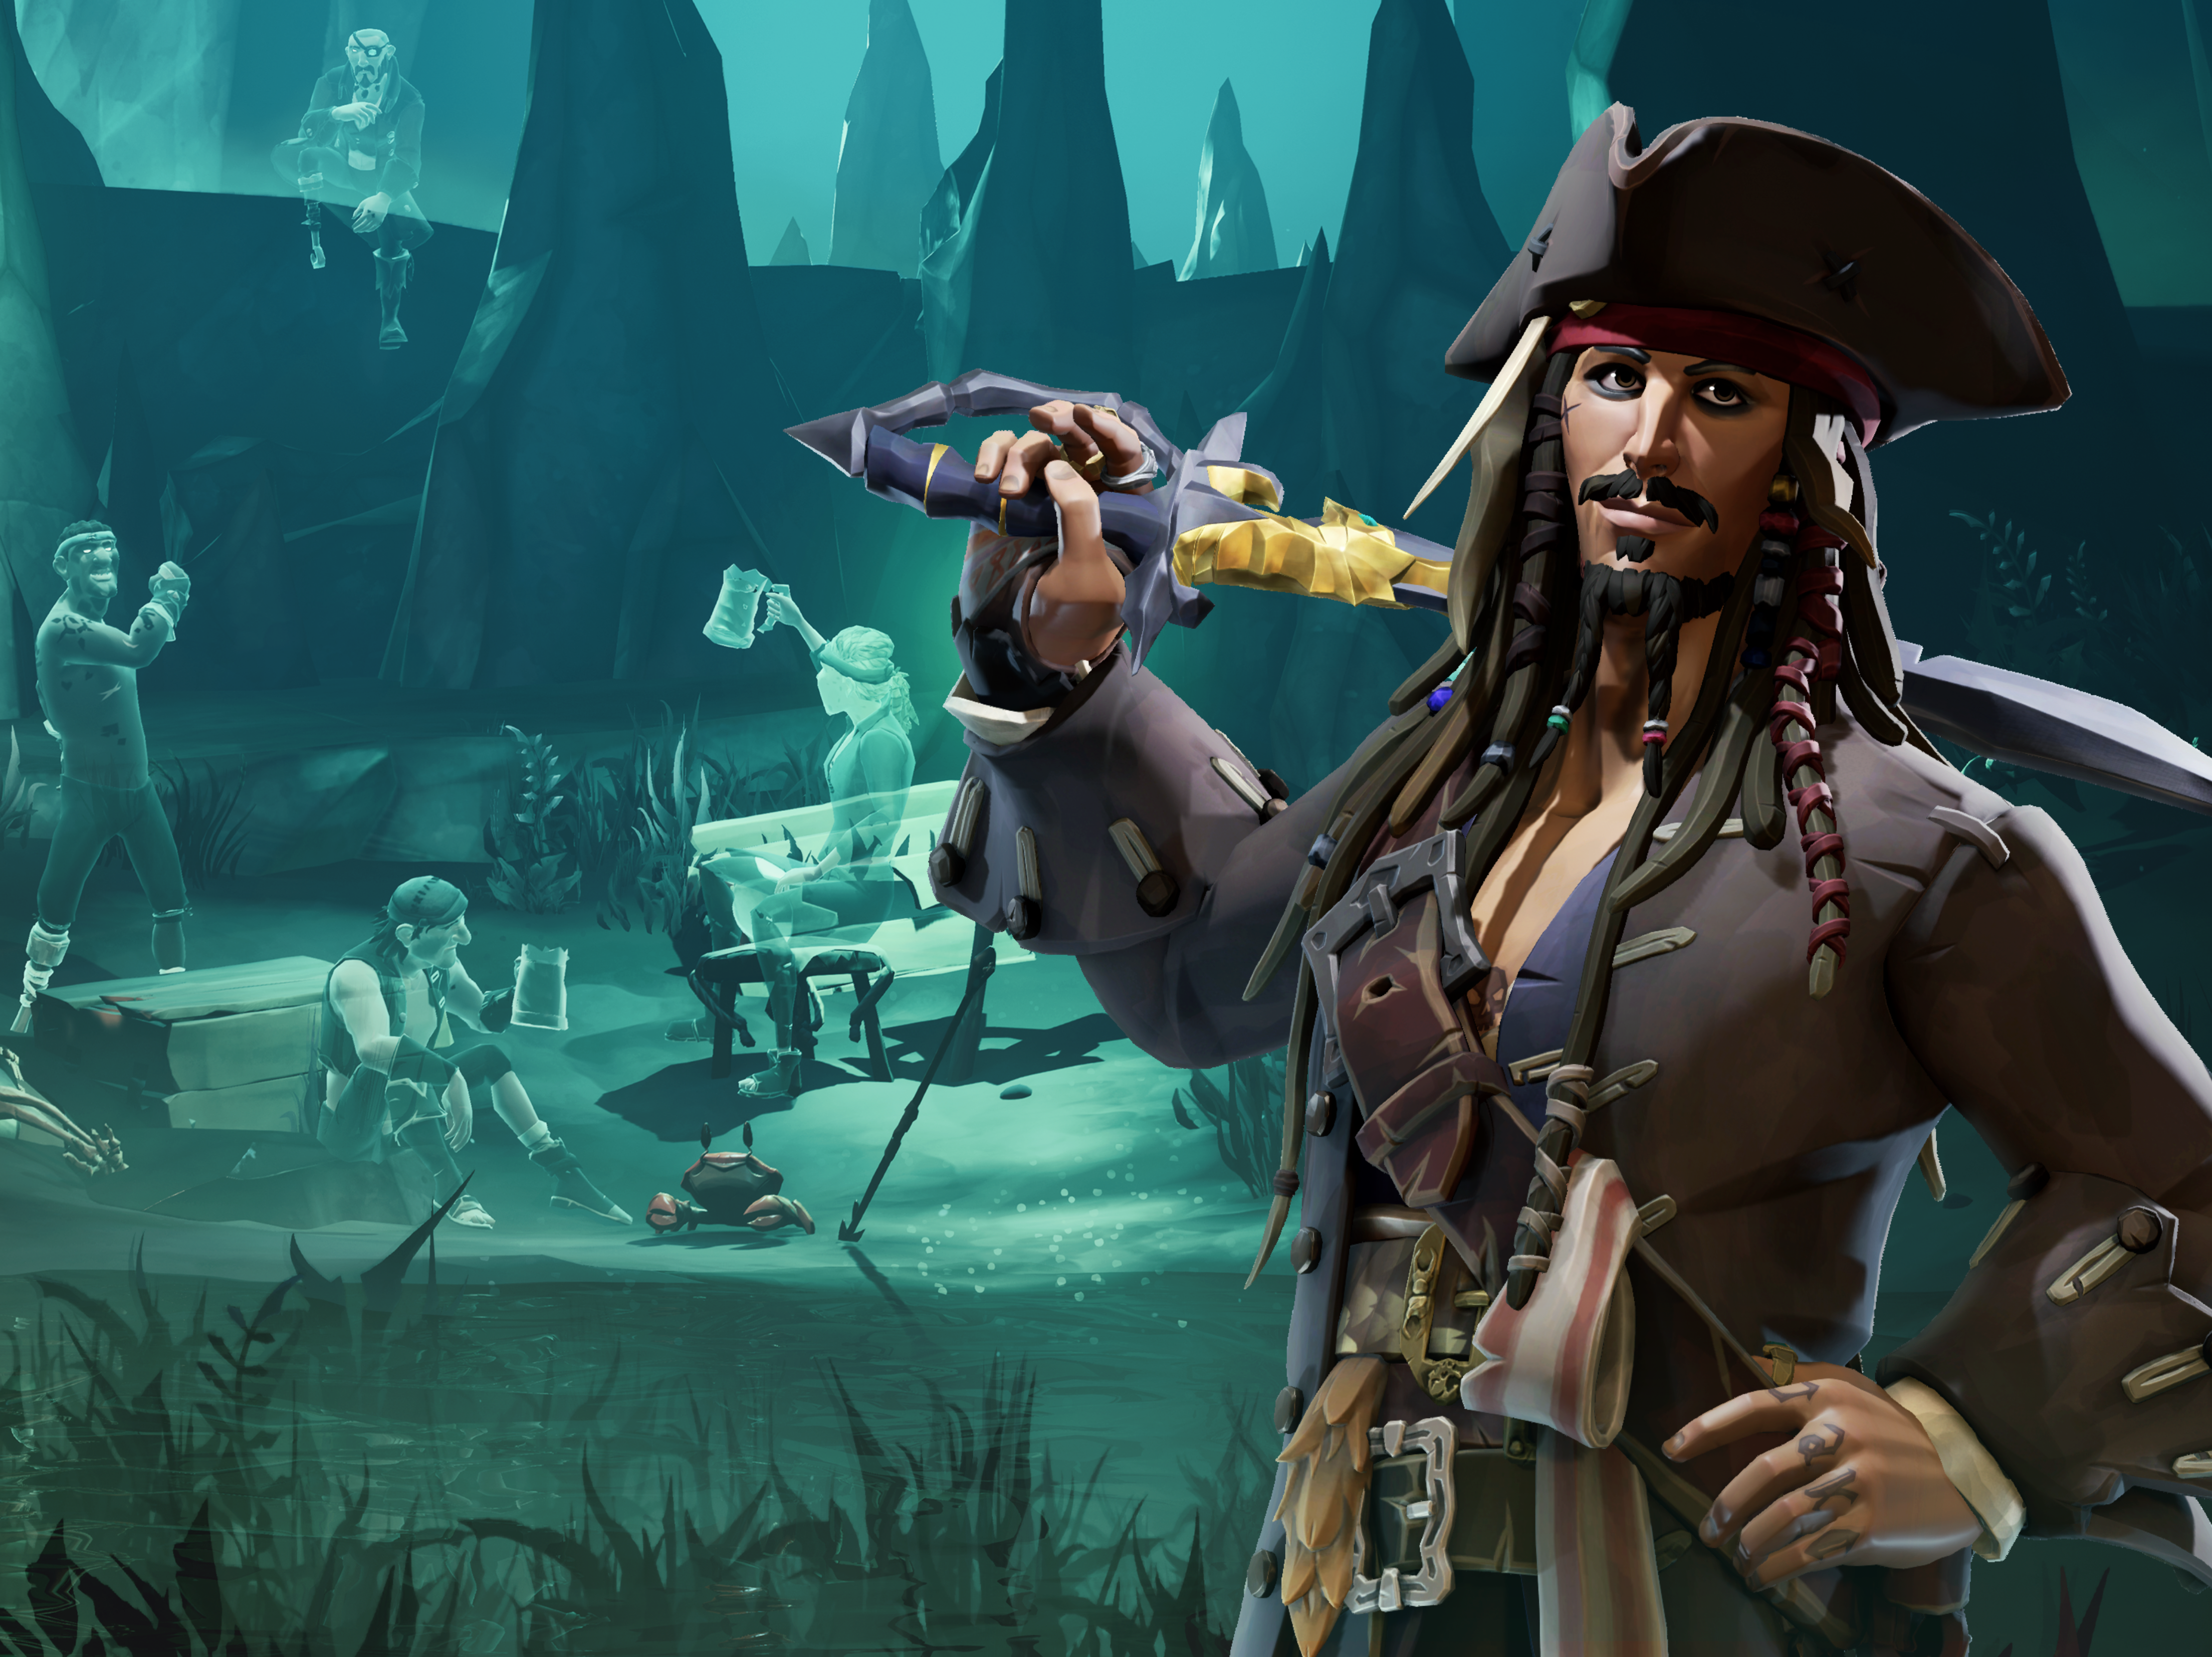 Watch the new Sea of Thieves: A Pirates Life gameplay trailer here